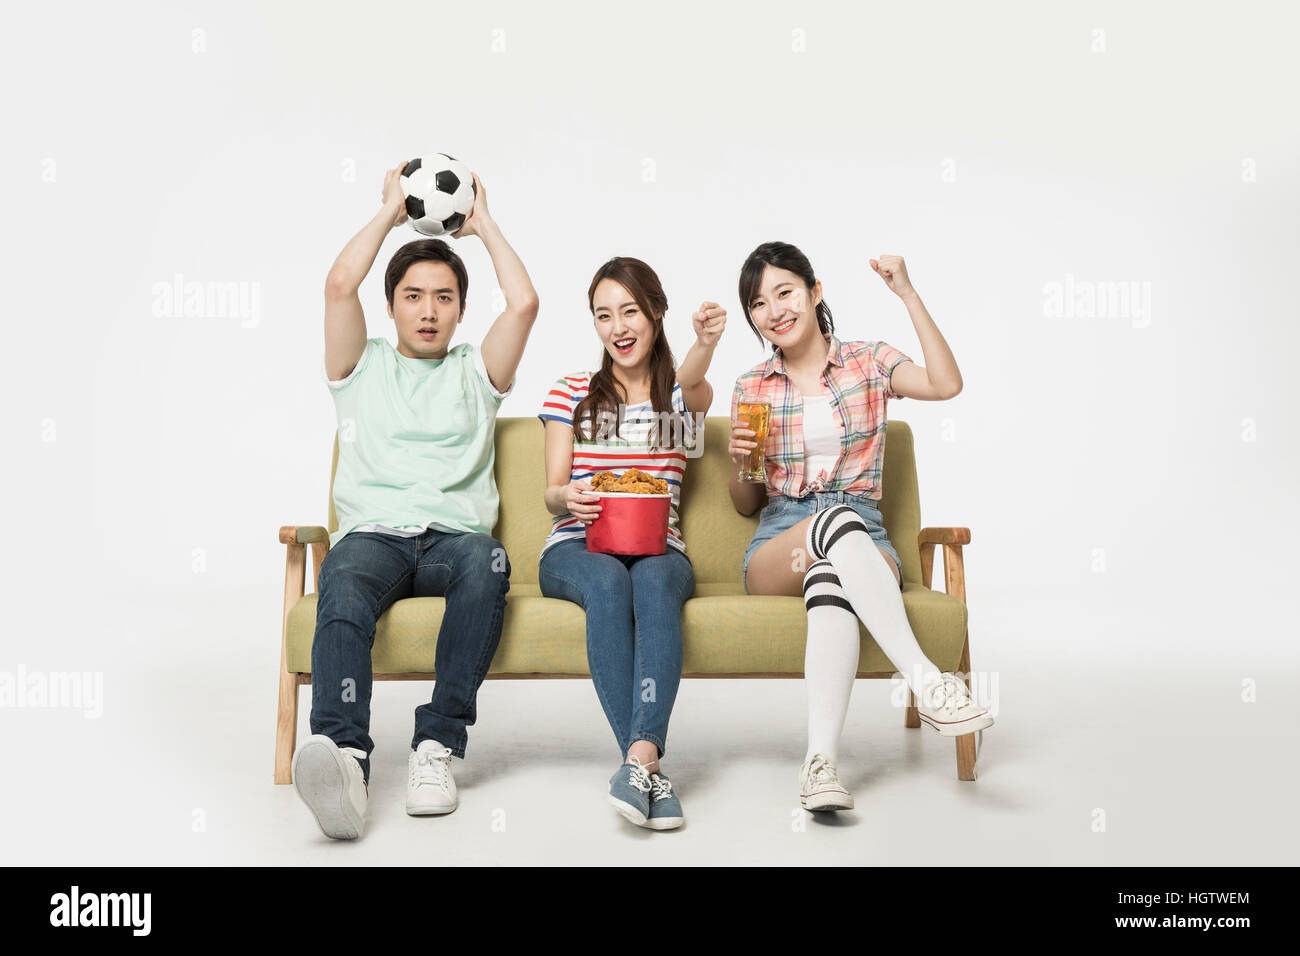 Young smiling people cheering watching a game on TV Stock Photo